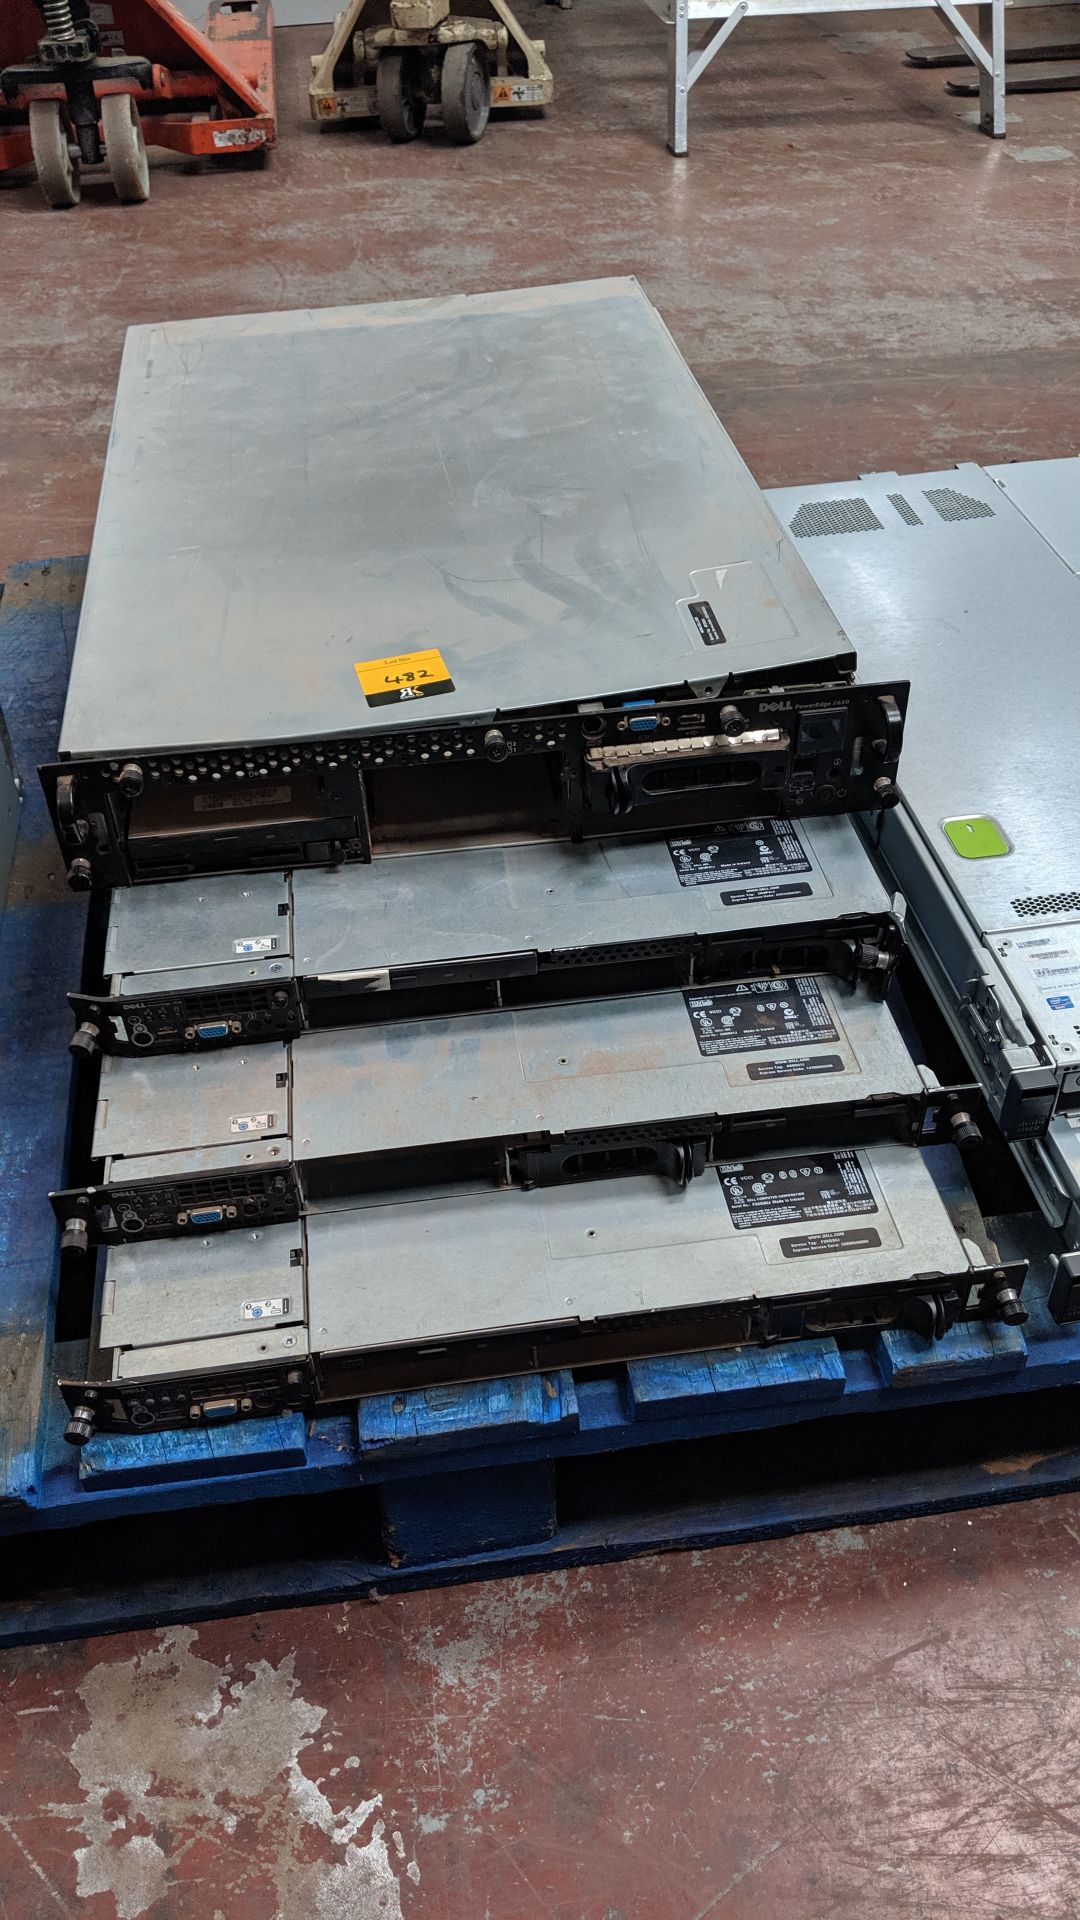 4 off assorted Dell Power Edge rack mountable servers. This is one of a large number of lots being